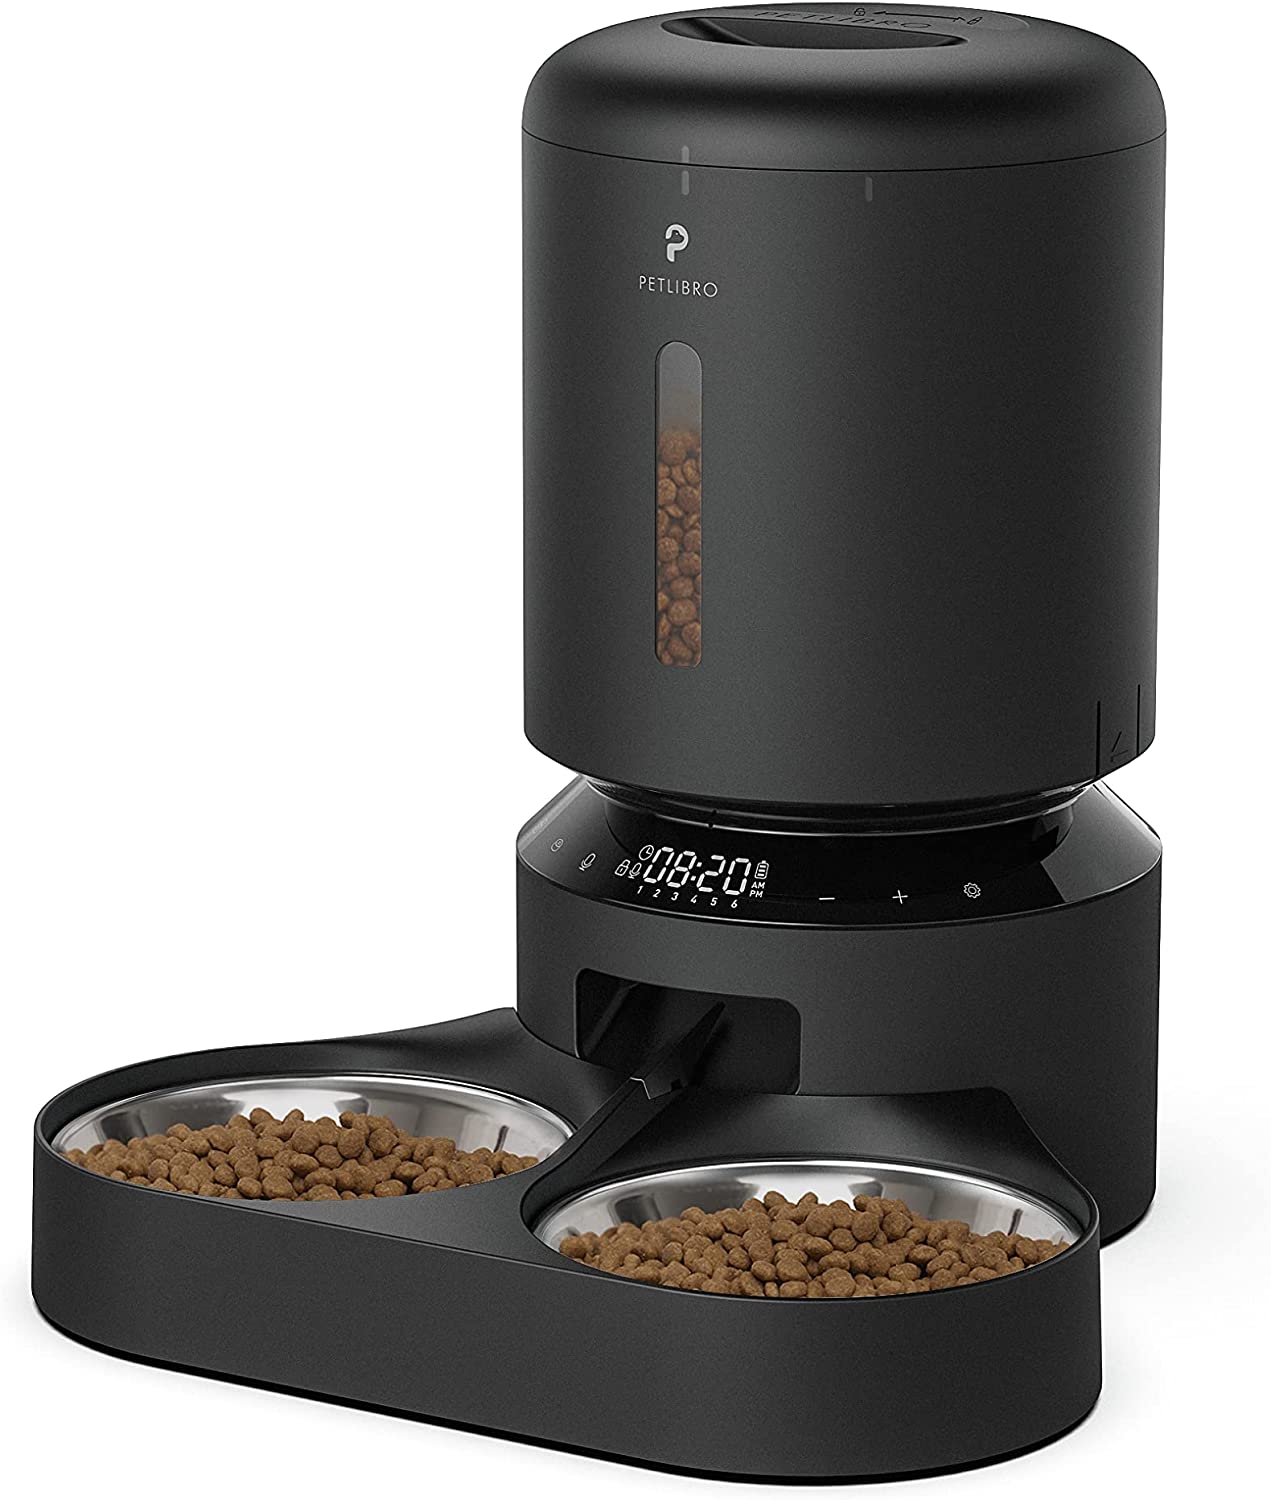 10. PETLIBRO Automatic Cat Feeder for Two Cats